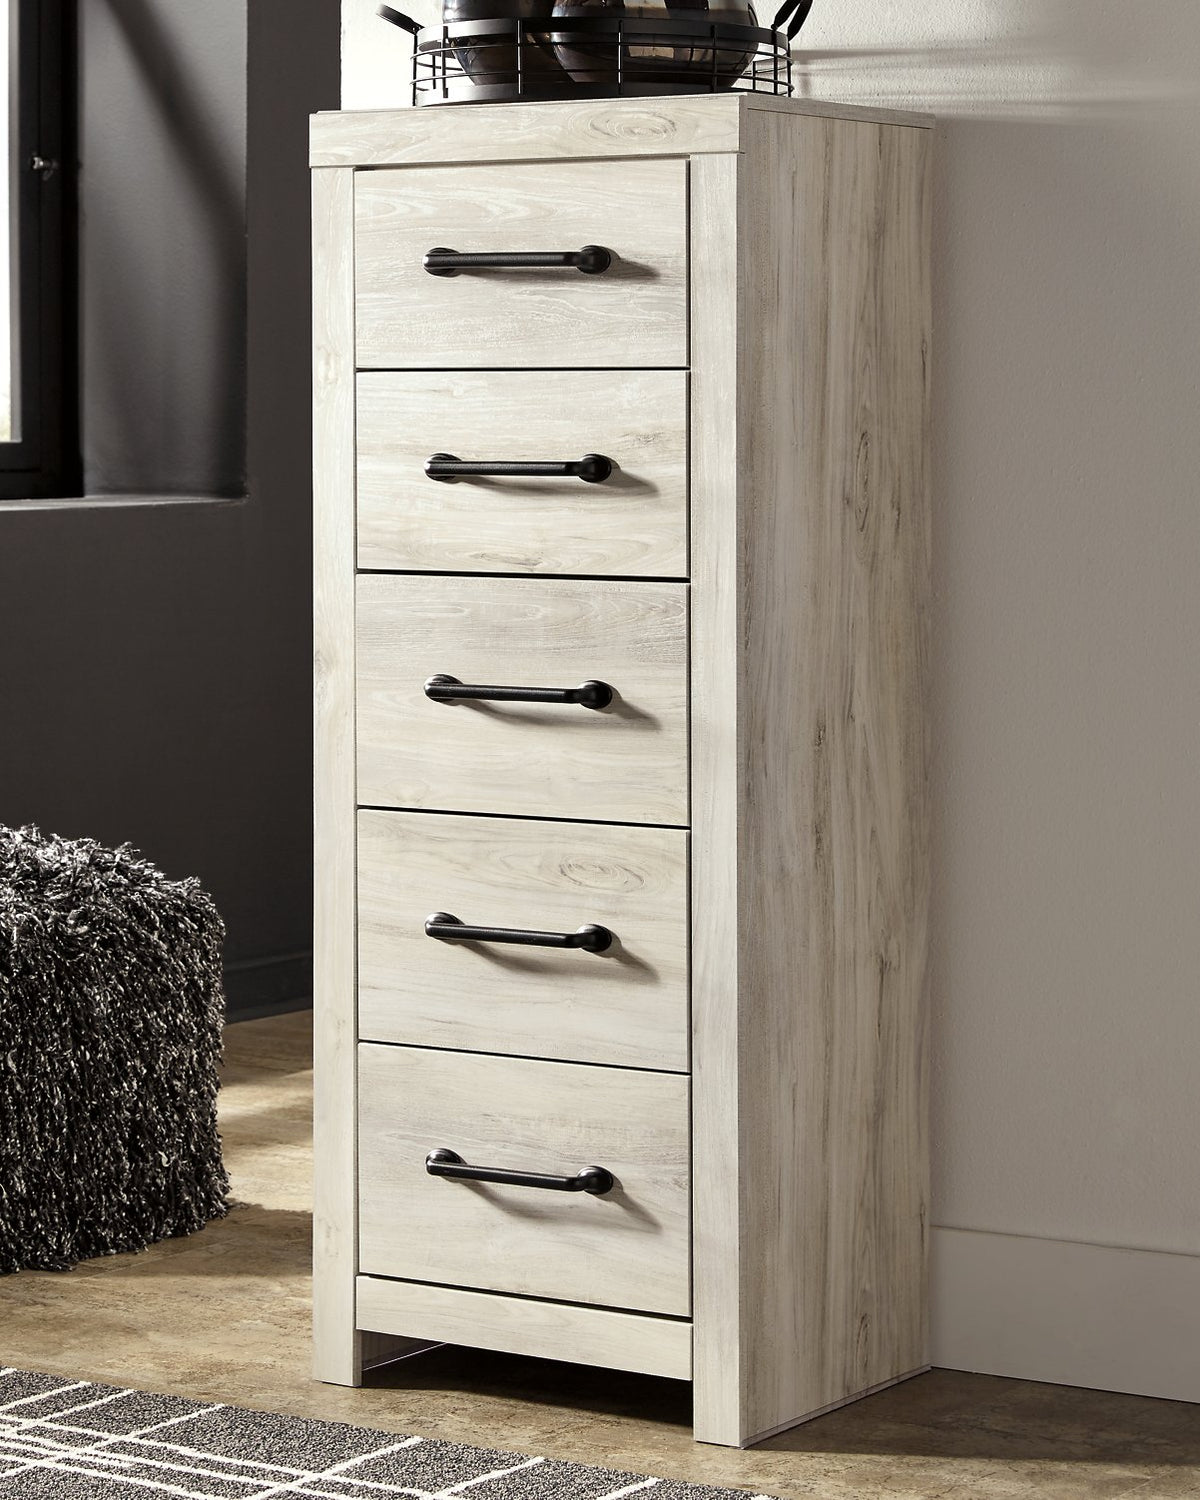 Cambeck Narrow Chest of Drawers - Half Price Furniture